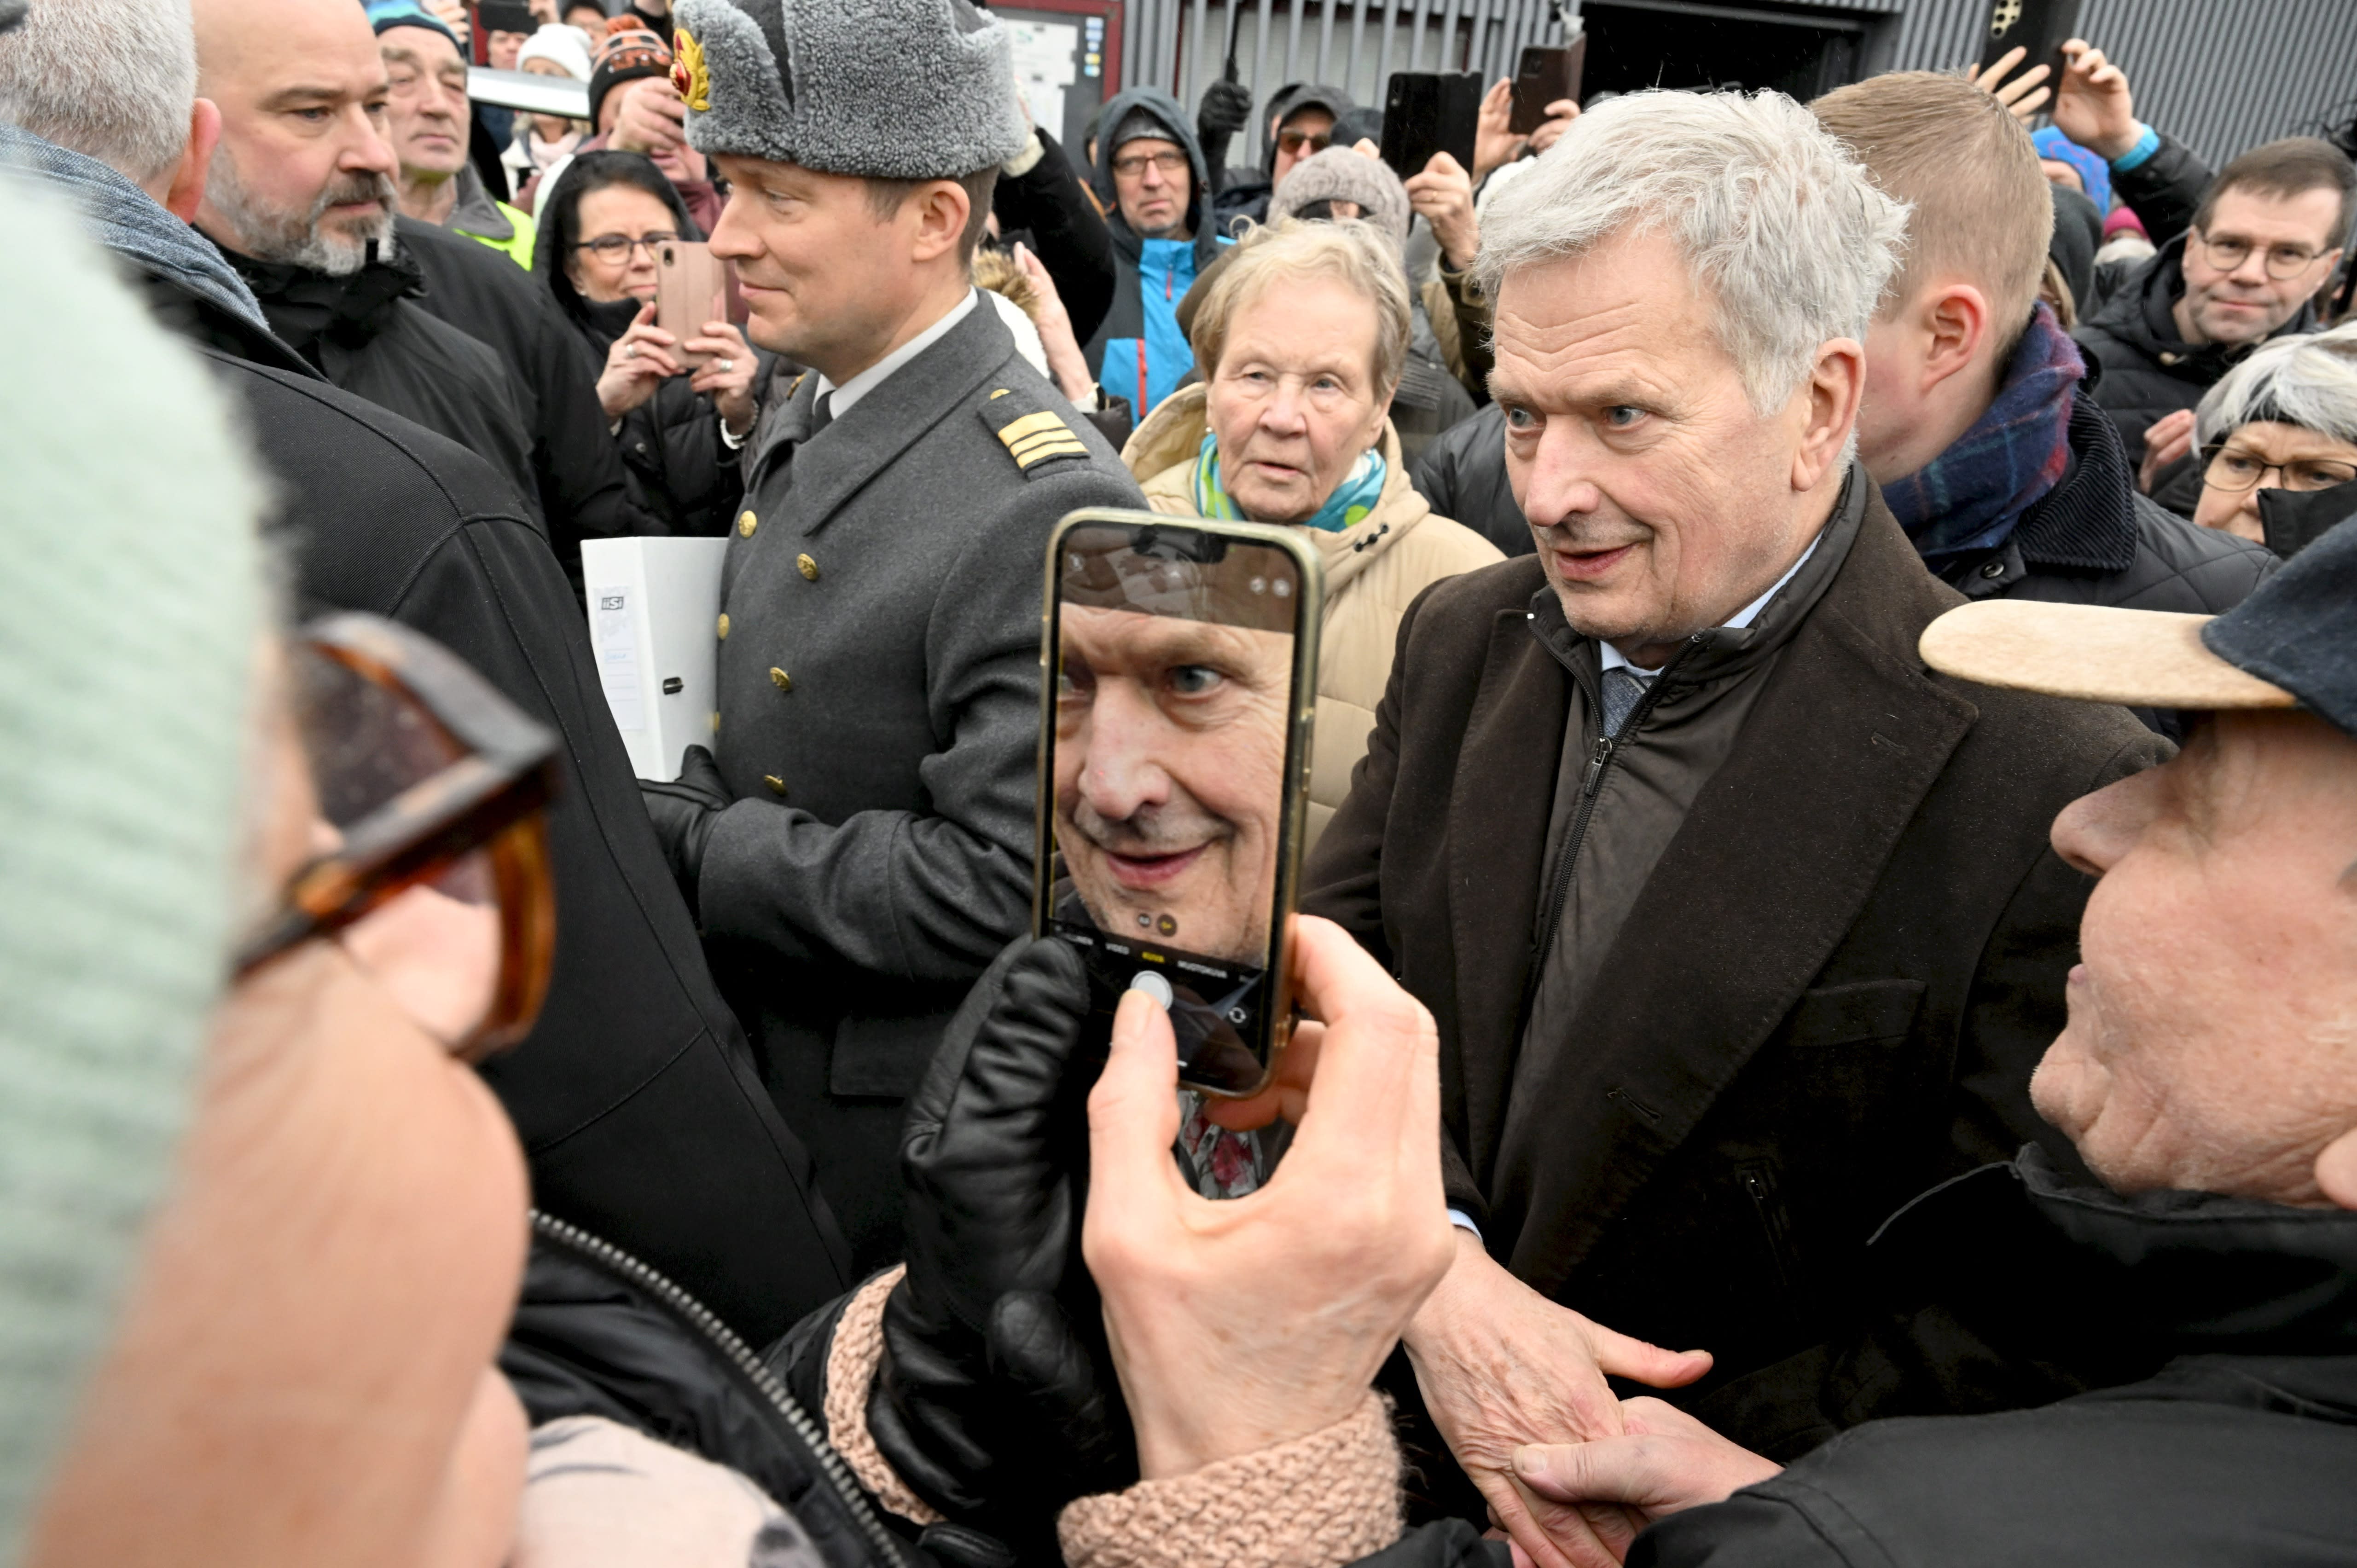 Hundreds greeted President Niinistö on his last regional visit to his hometown in Salo